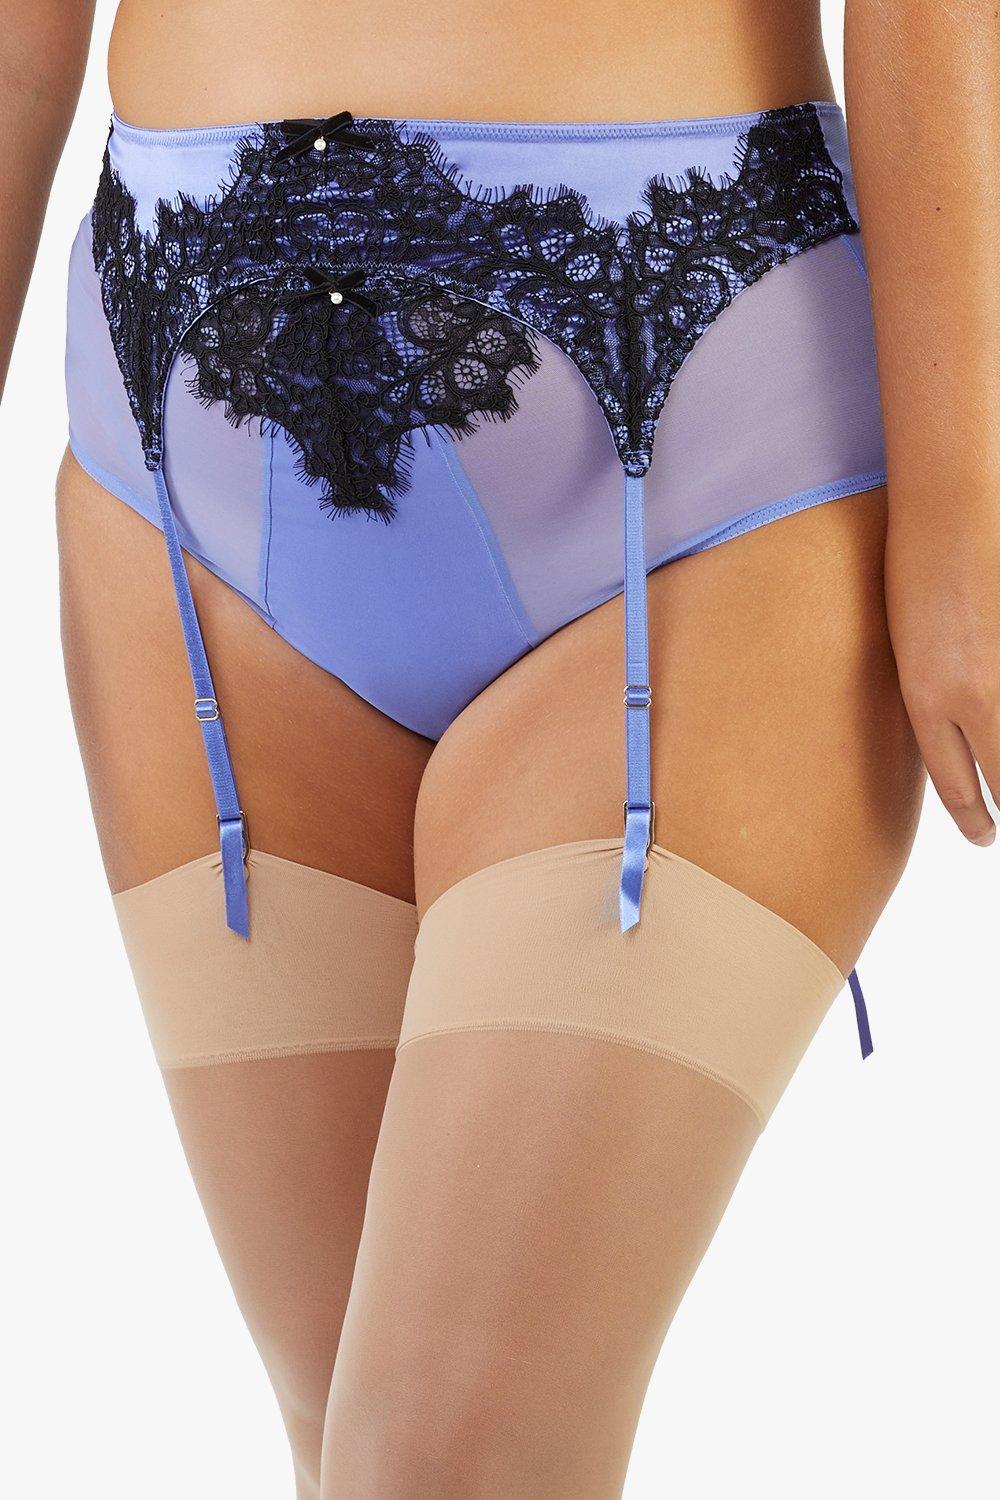 Stevie Lilac and Black Lace Suspender